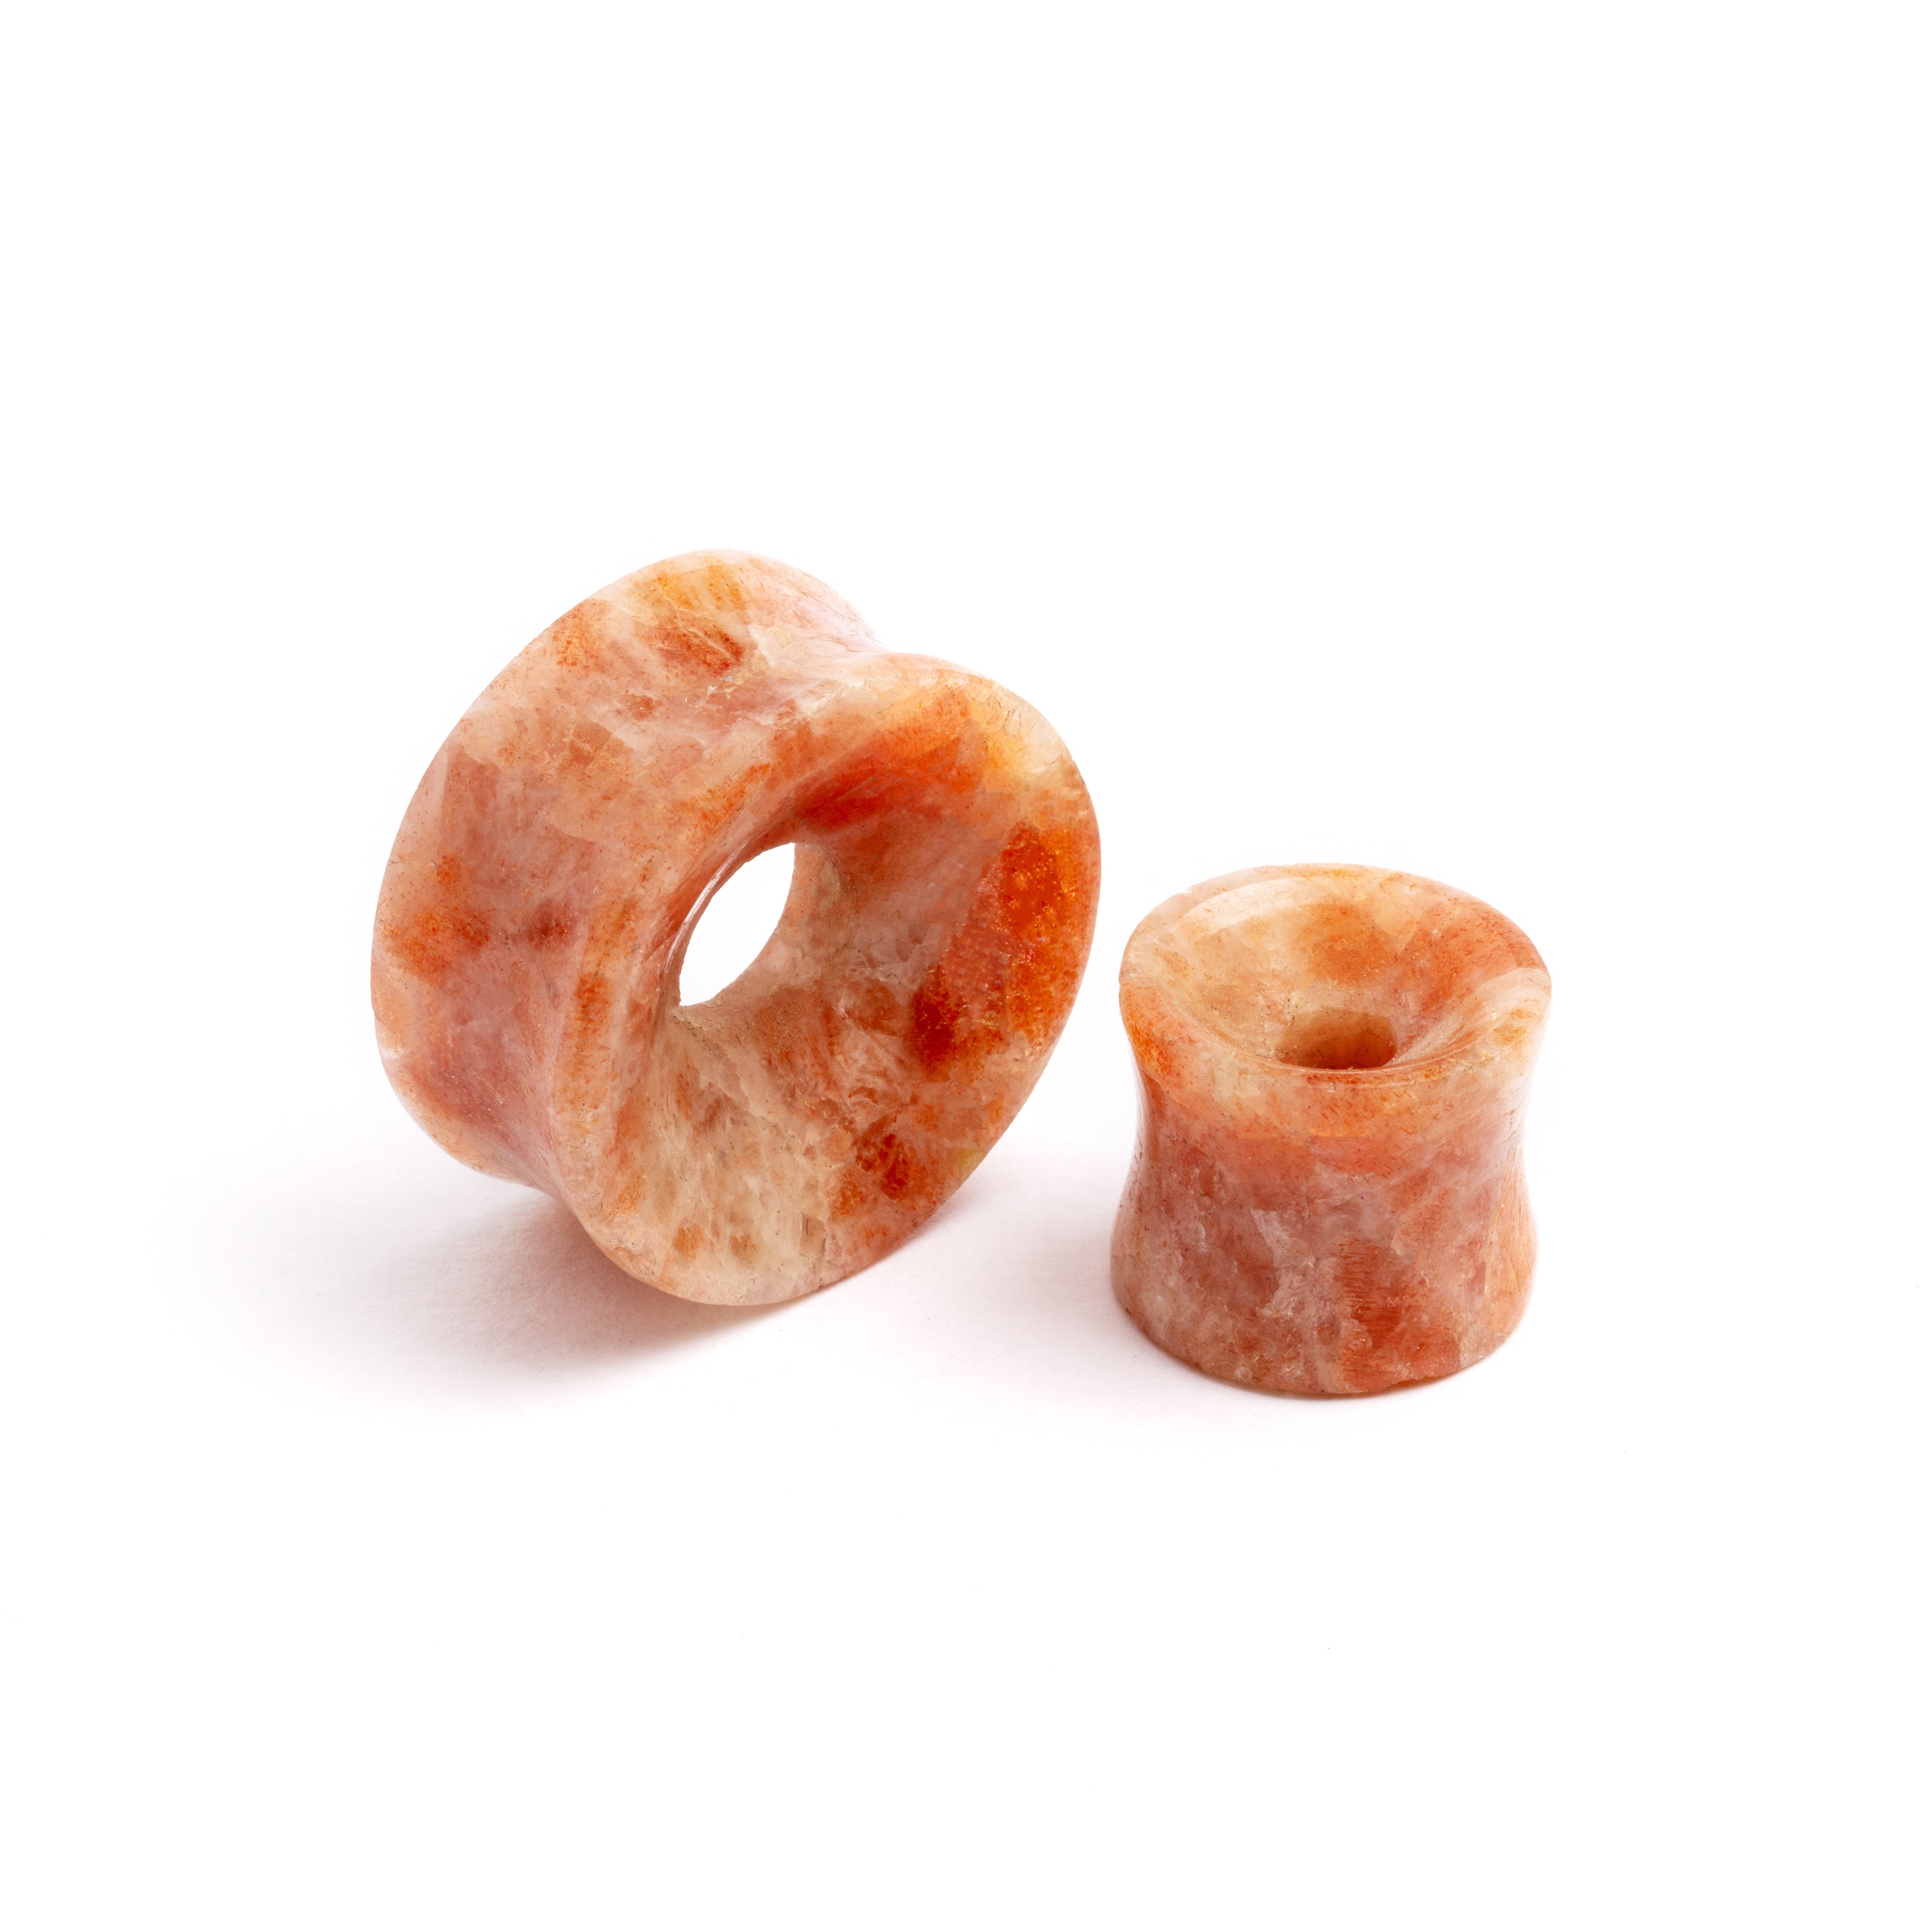 pair of Sunstone double flare stone ear tunnels front and side view